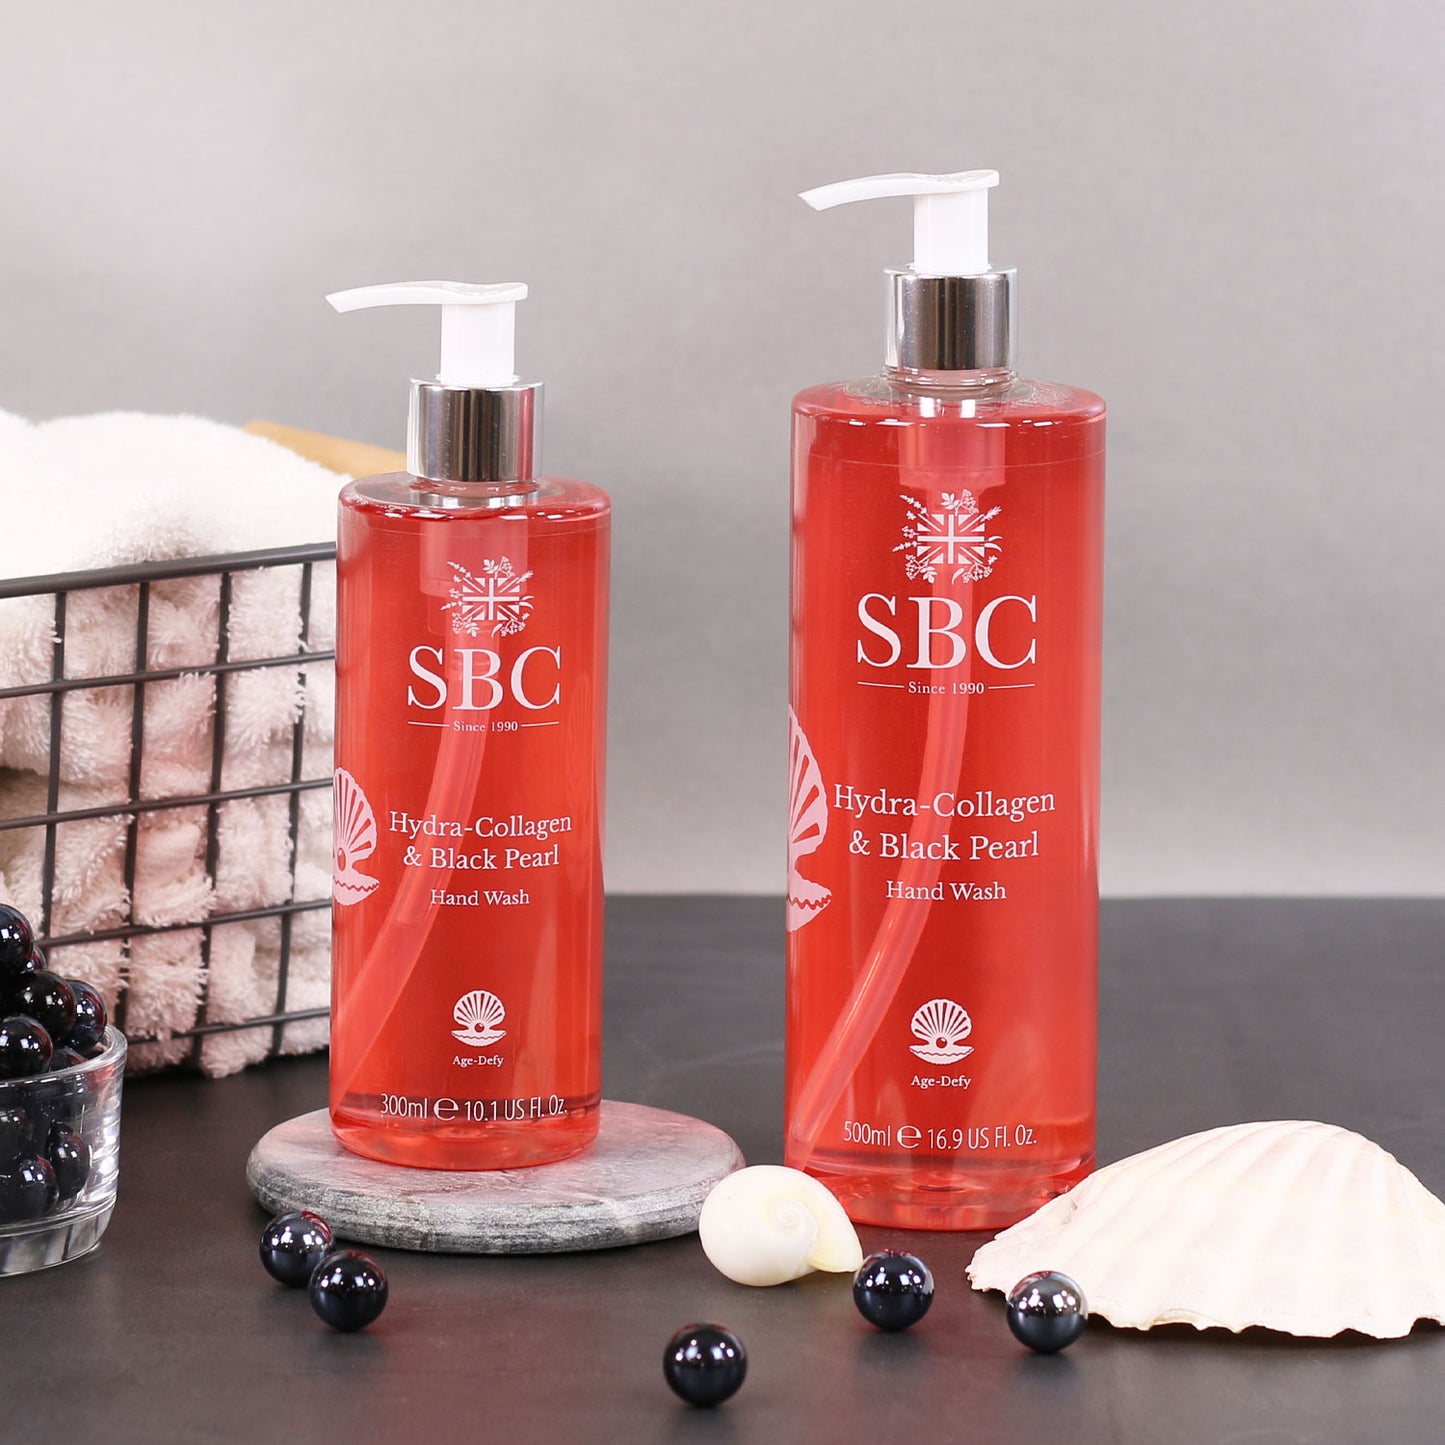 300ml and 500ml Hydra-Collagen & Black Pearl Hand wash on a grey background with black pearls